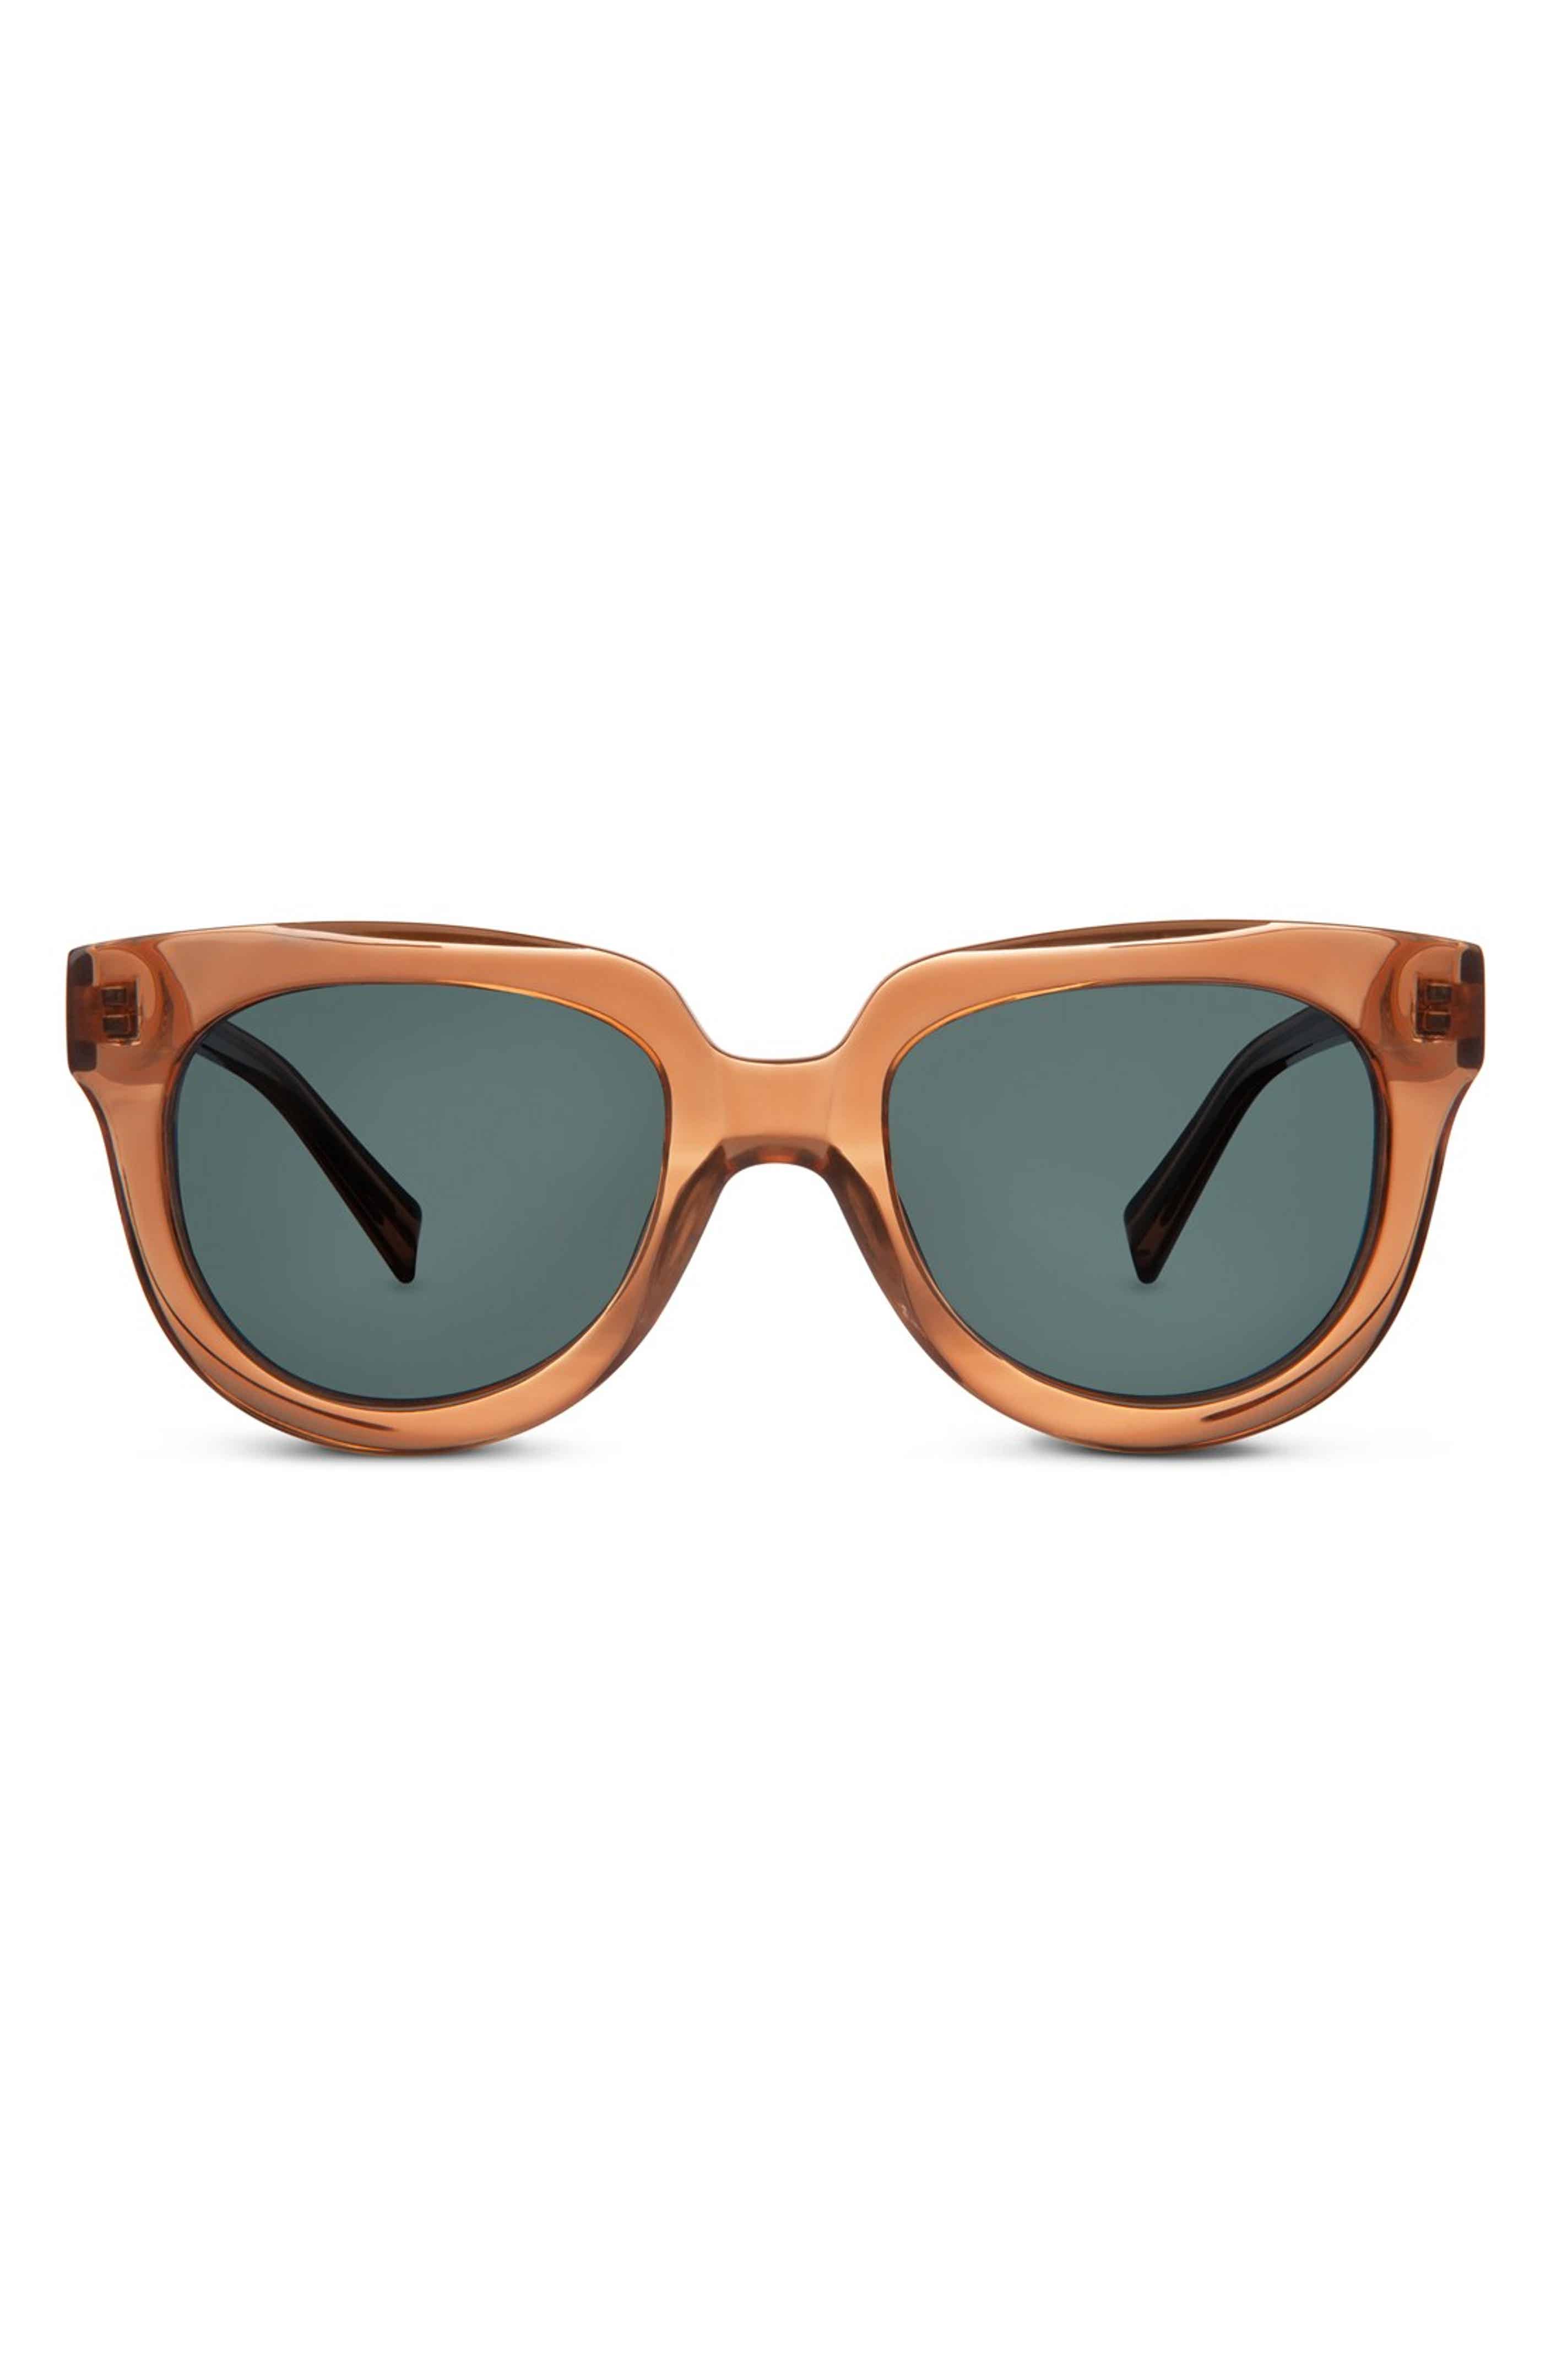 Warby Parker 'Banks' 52mm Polarized Sunglasses | Nordstrom